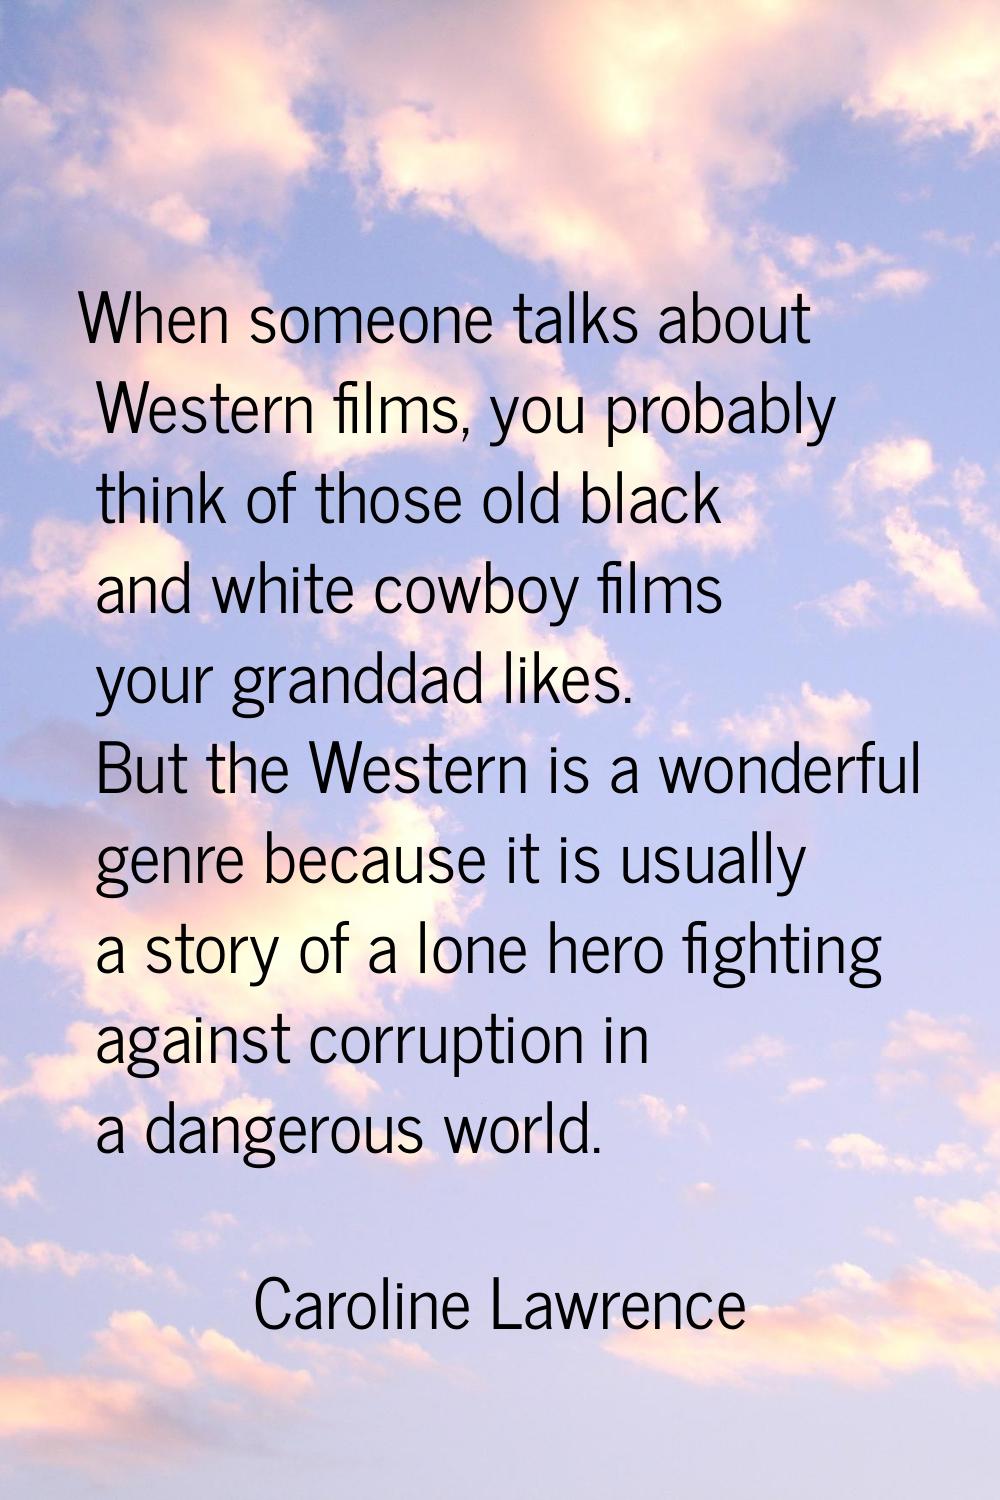 When someone talks about Western films, you probably think of those old black and white cowboy film